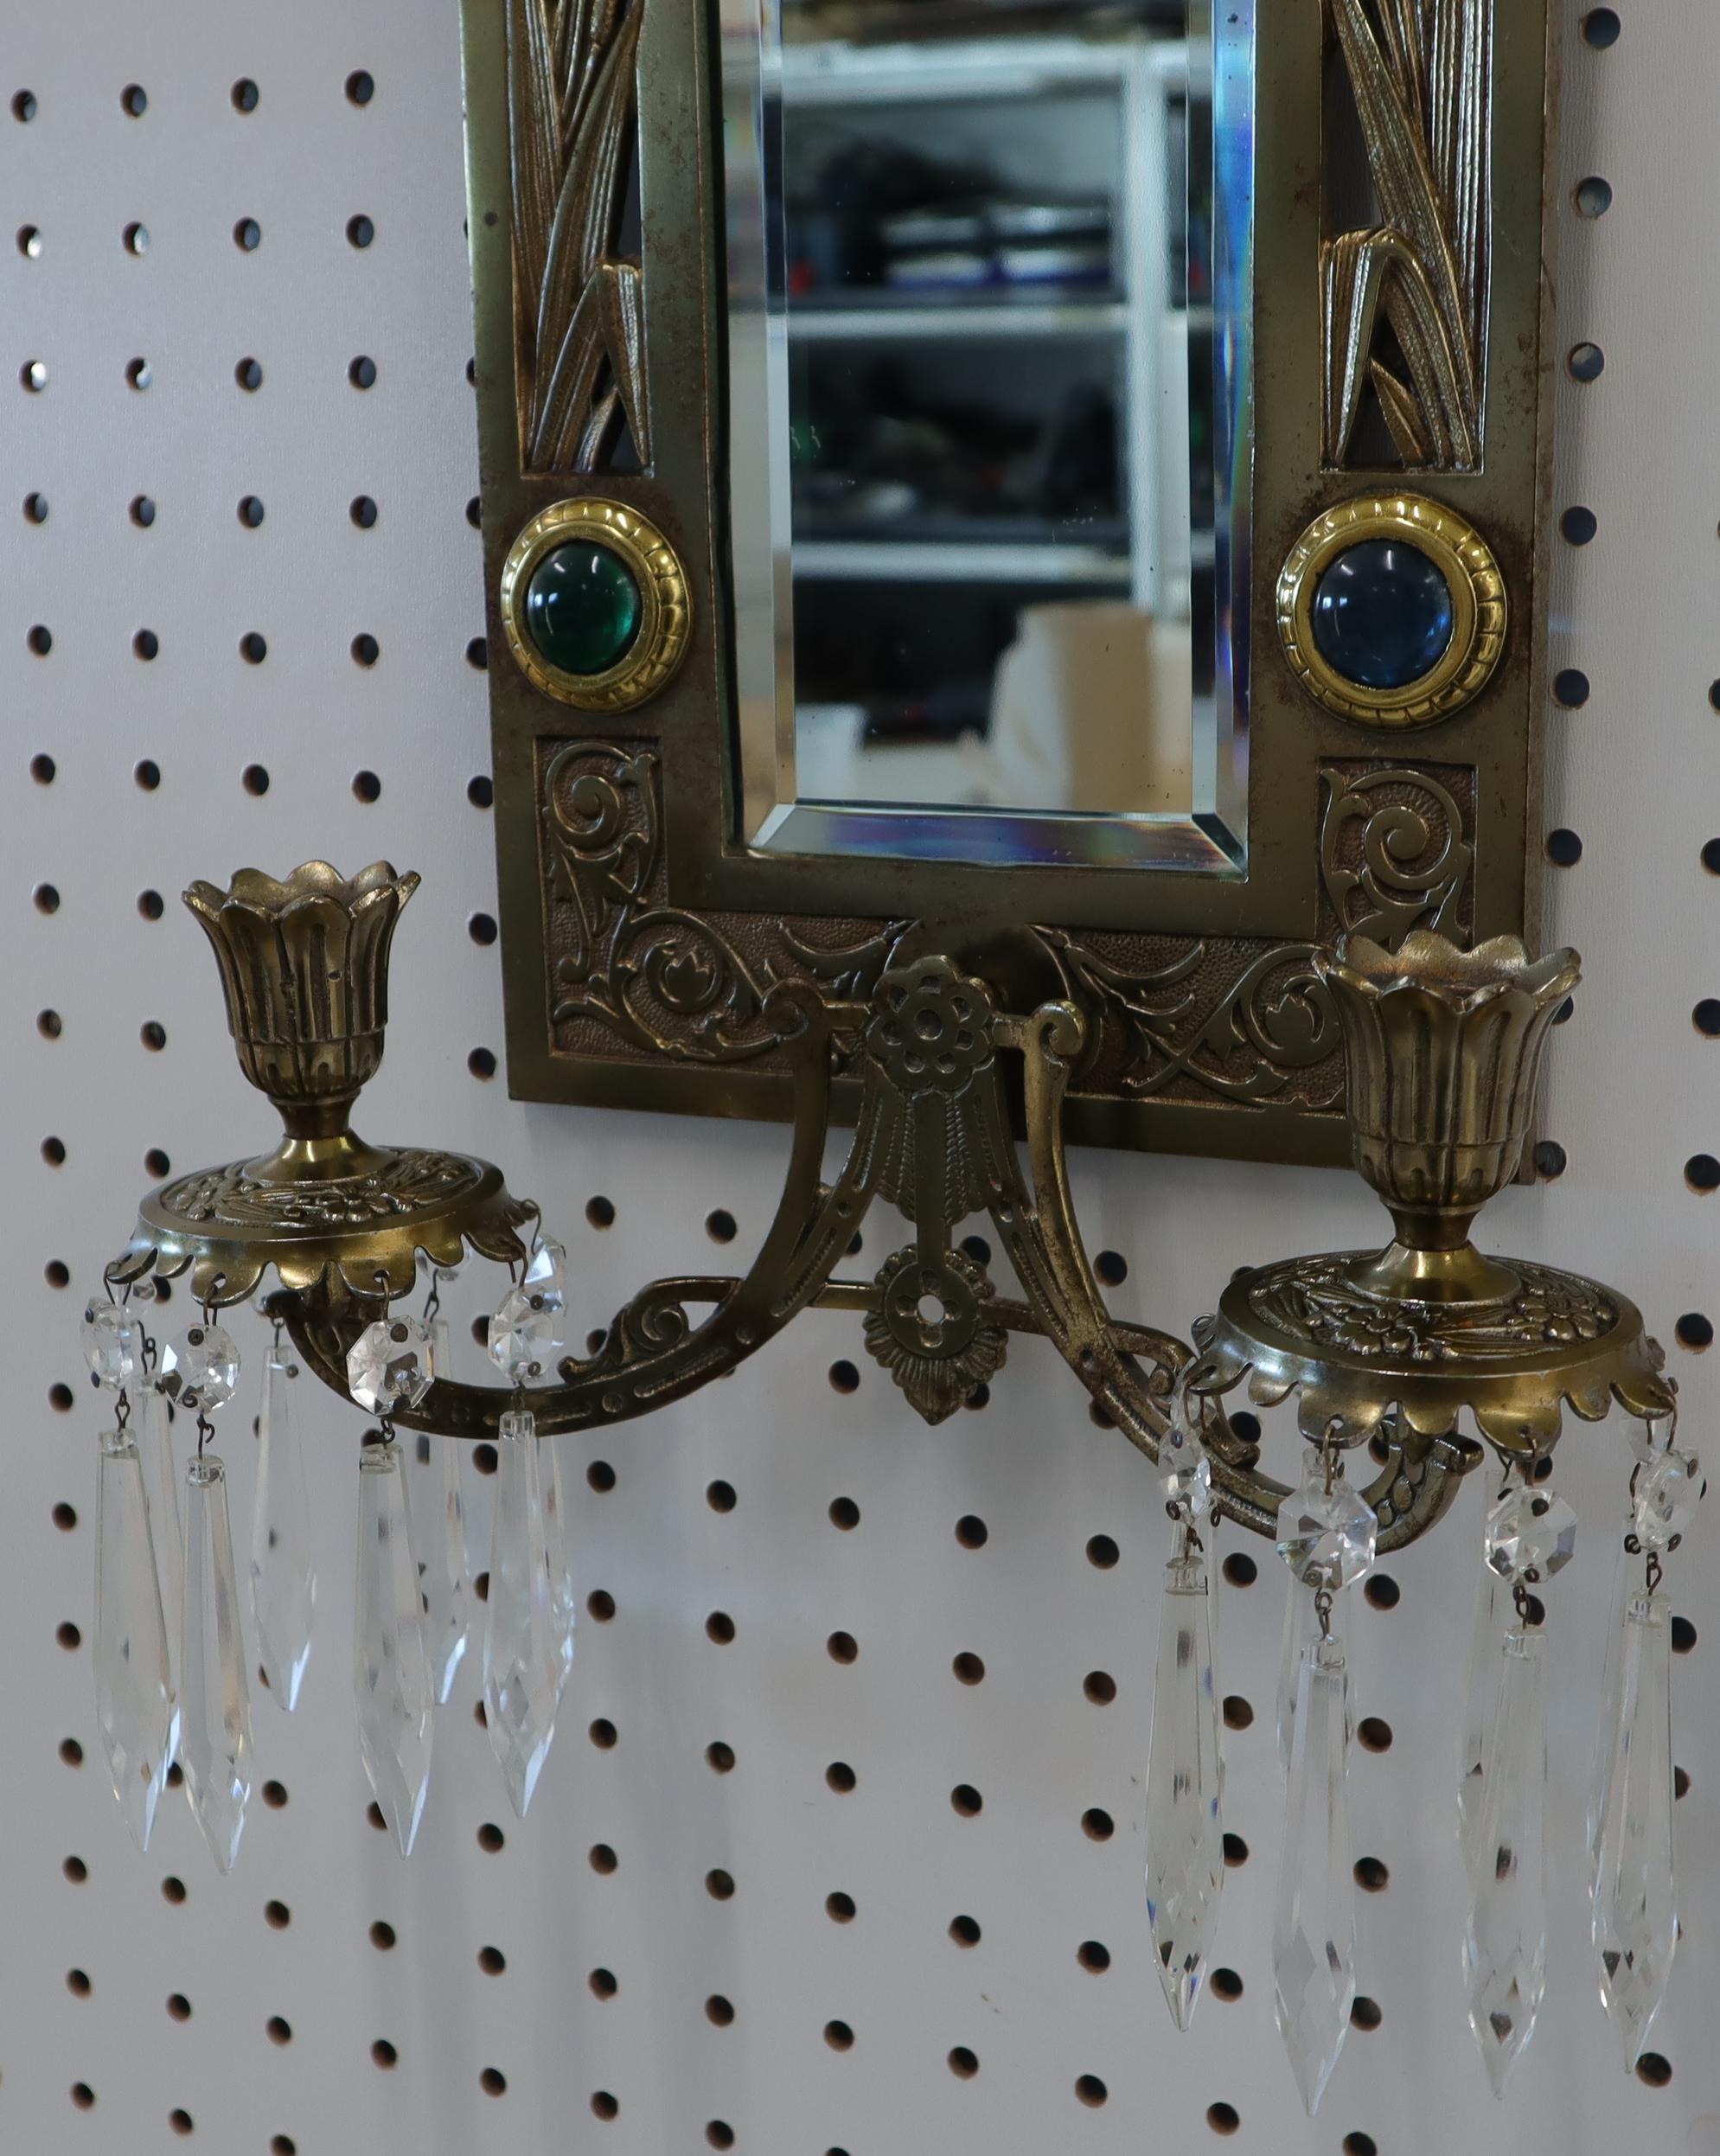 antique mirrored candle sconces